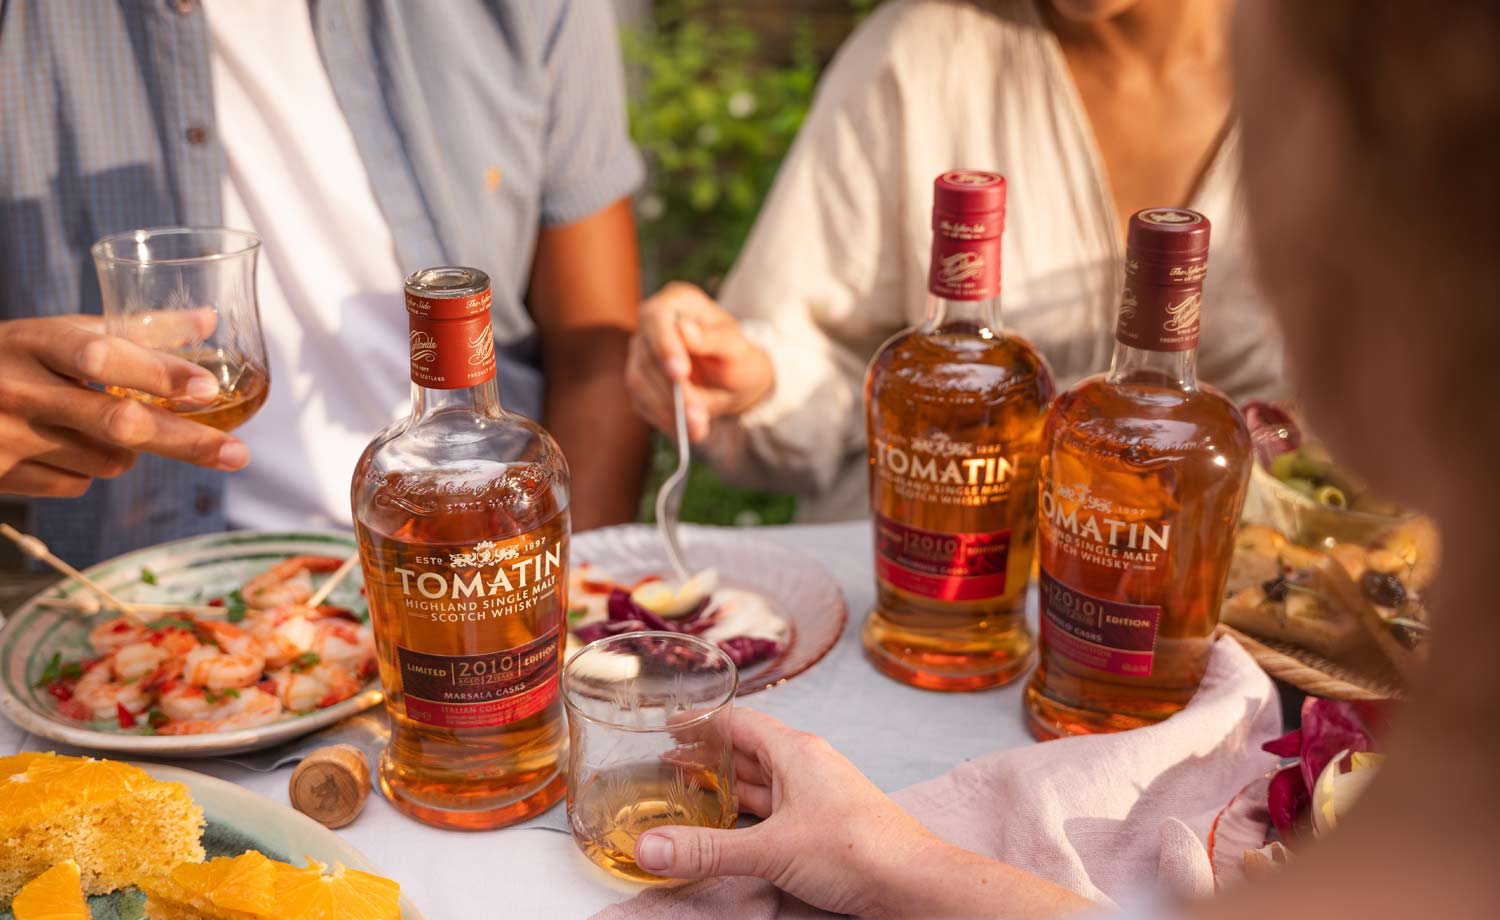 Tomatin Scotch Whisky Italian Collection